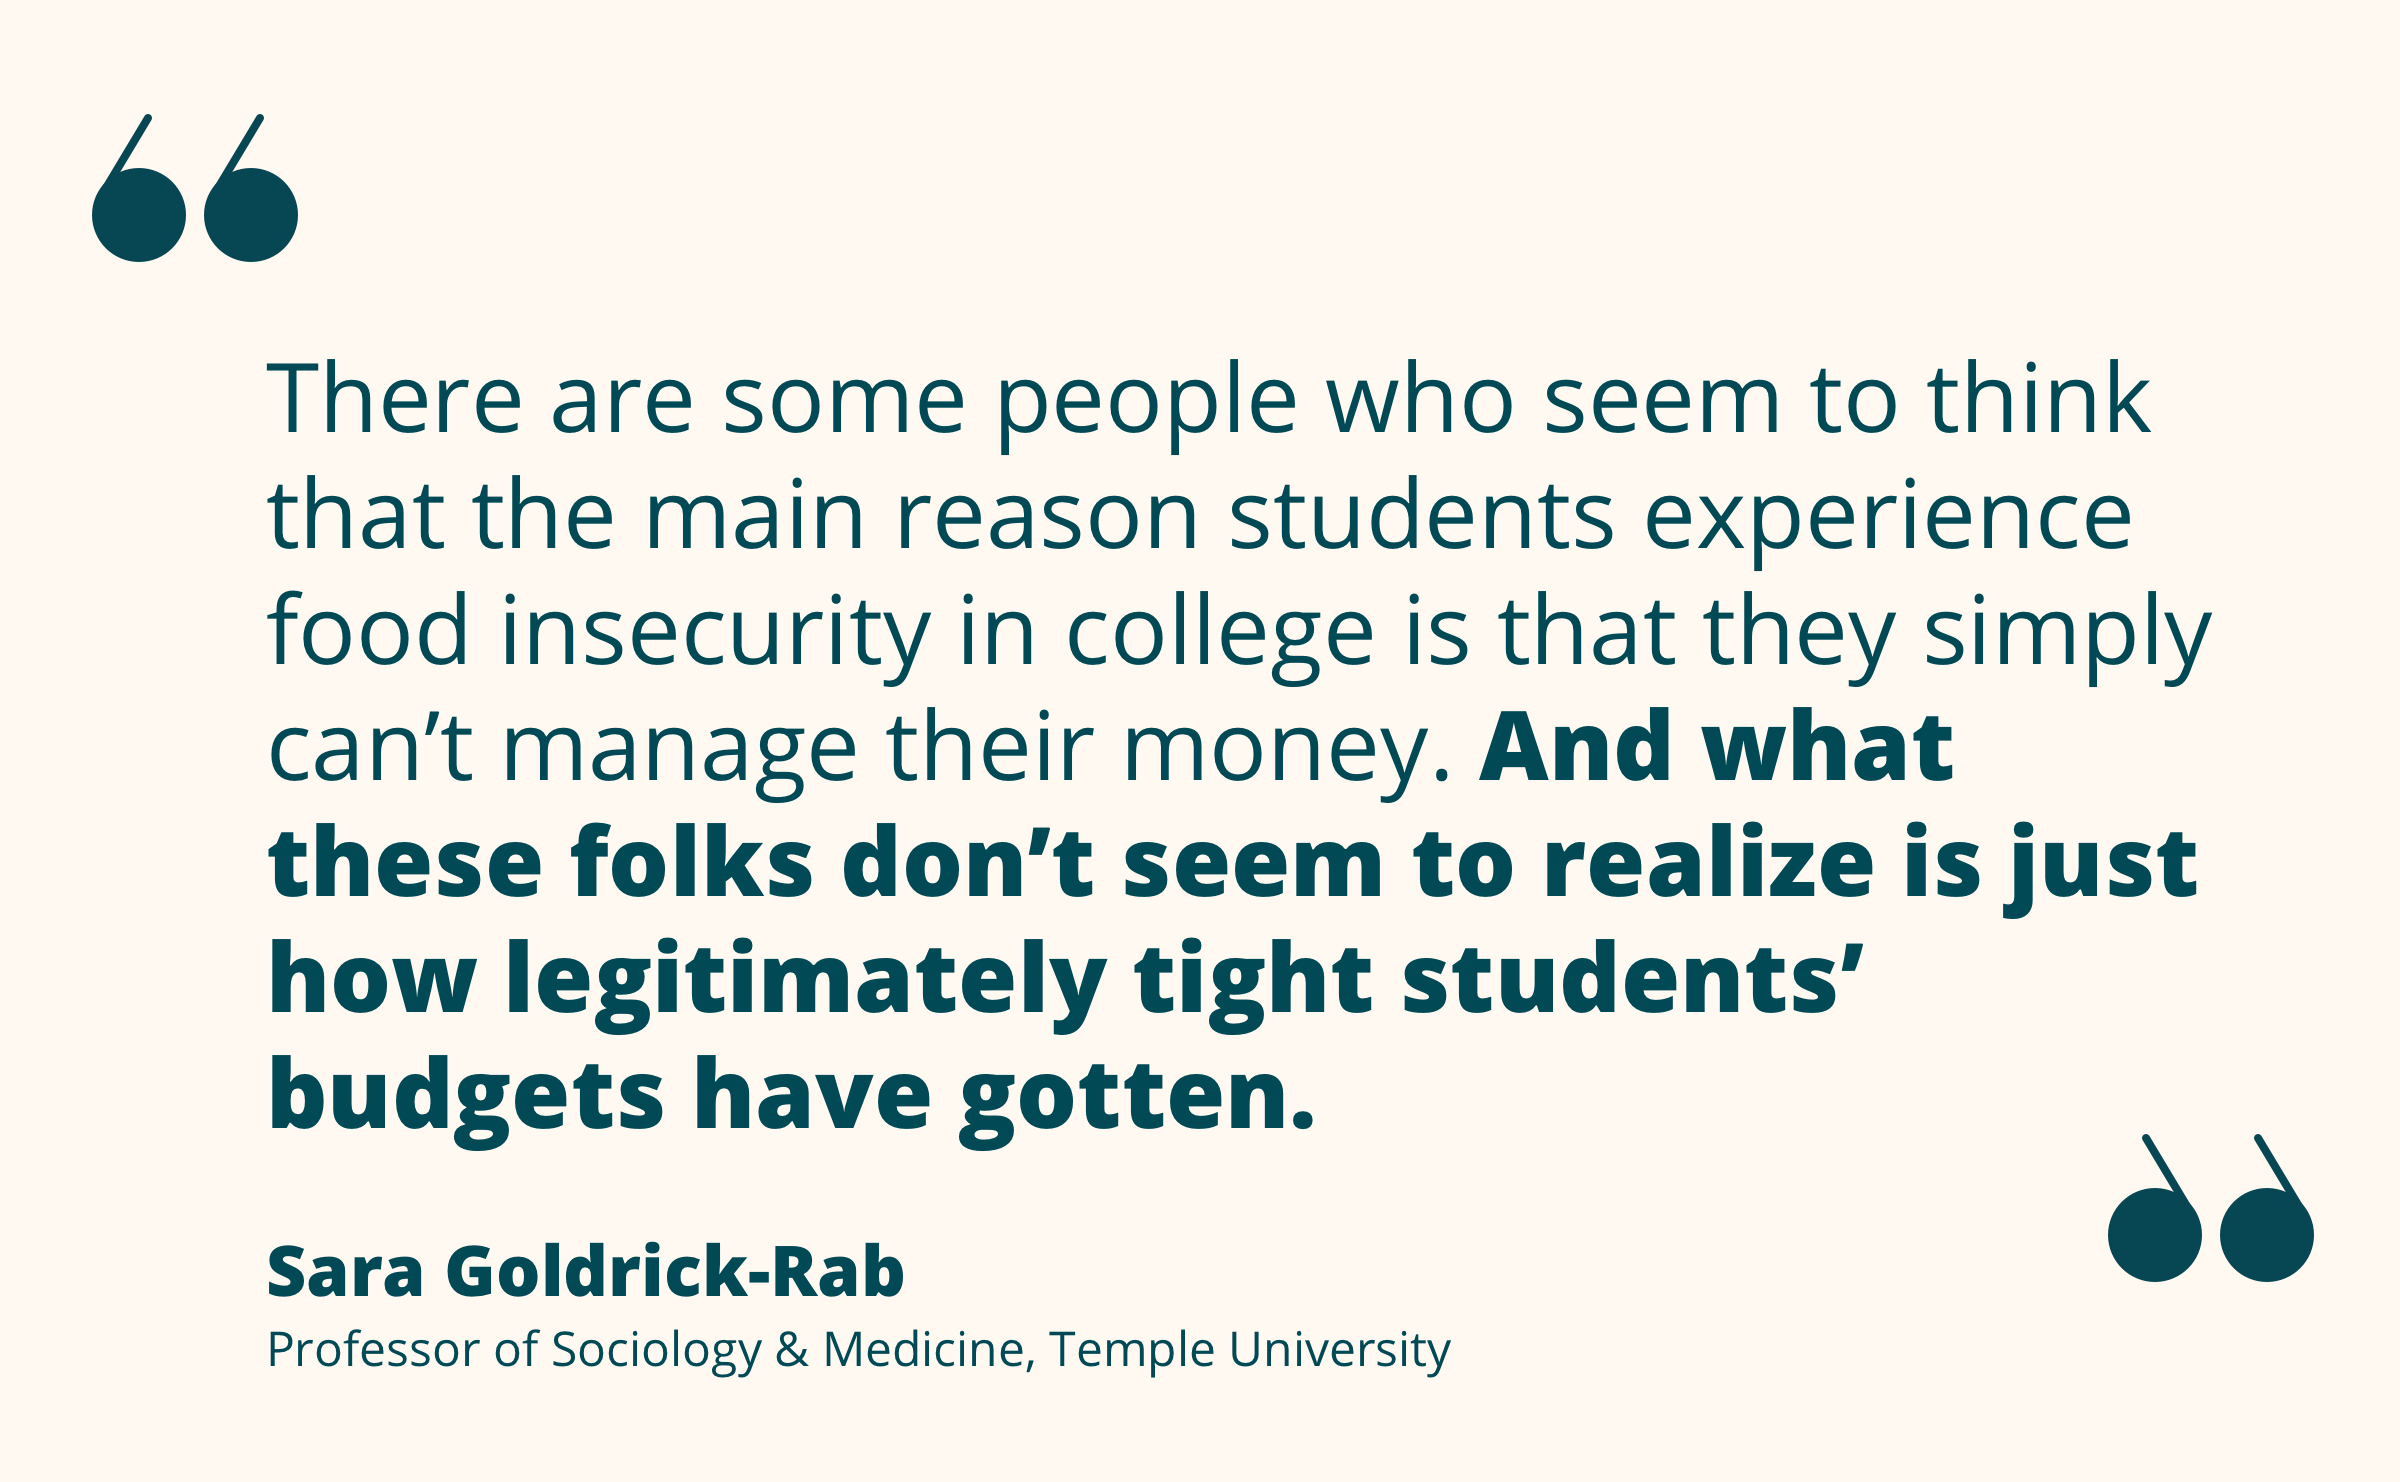 Quote from Sara Goldrick-Rab re: student food insecurity is about legitimately tight budgets, not bad money management.